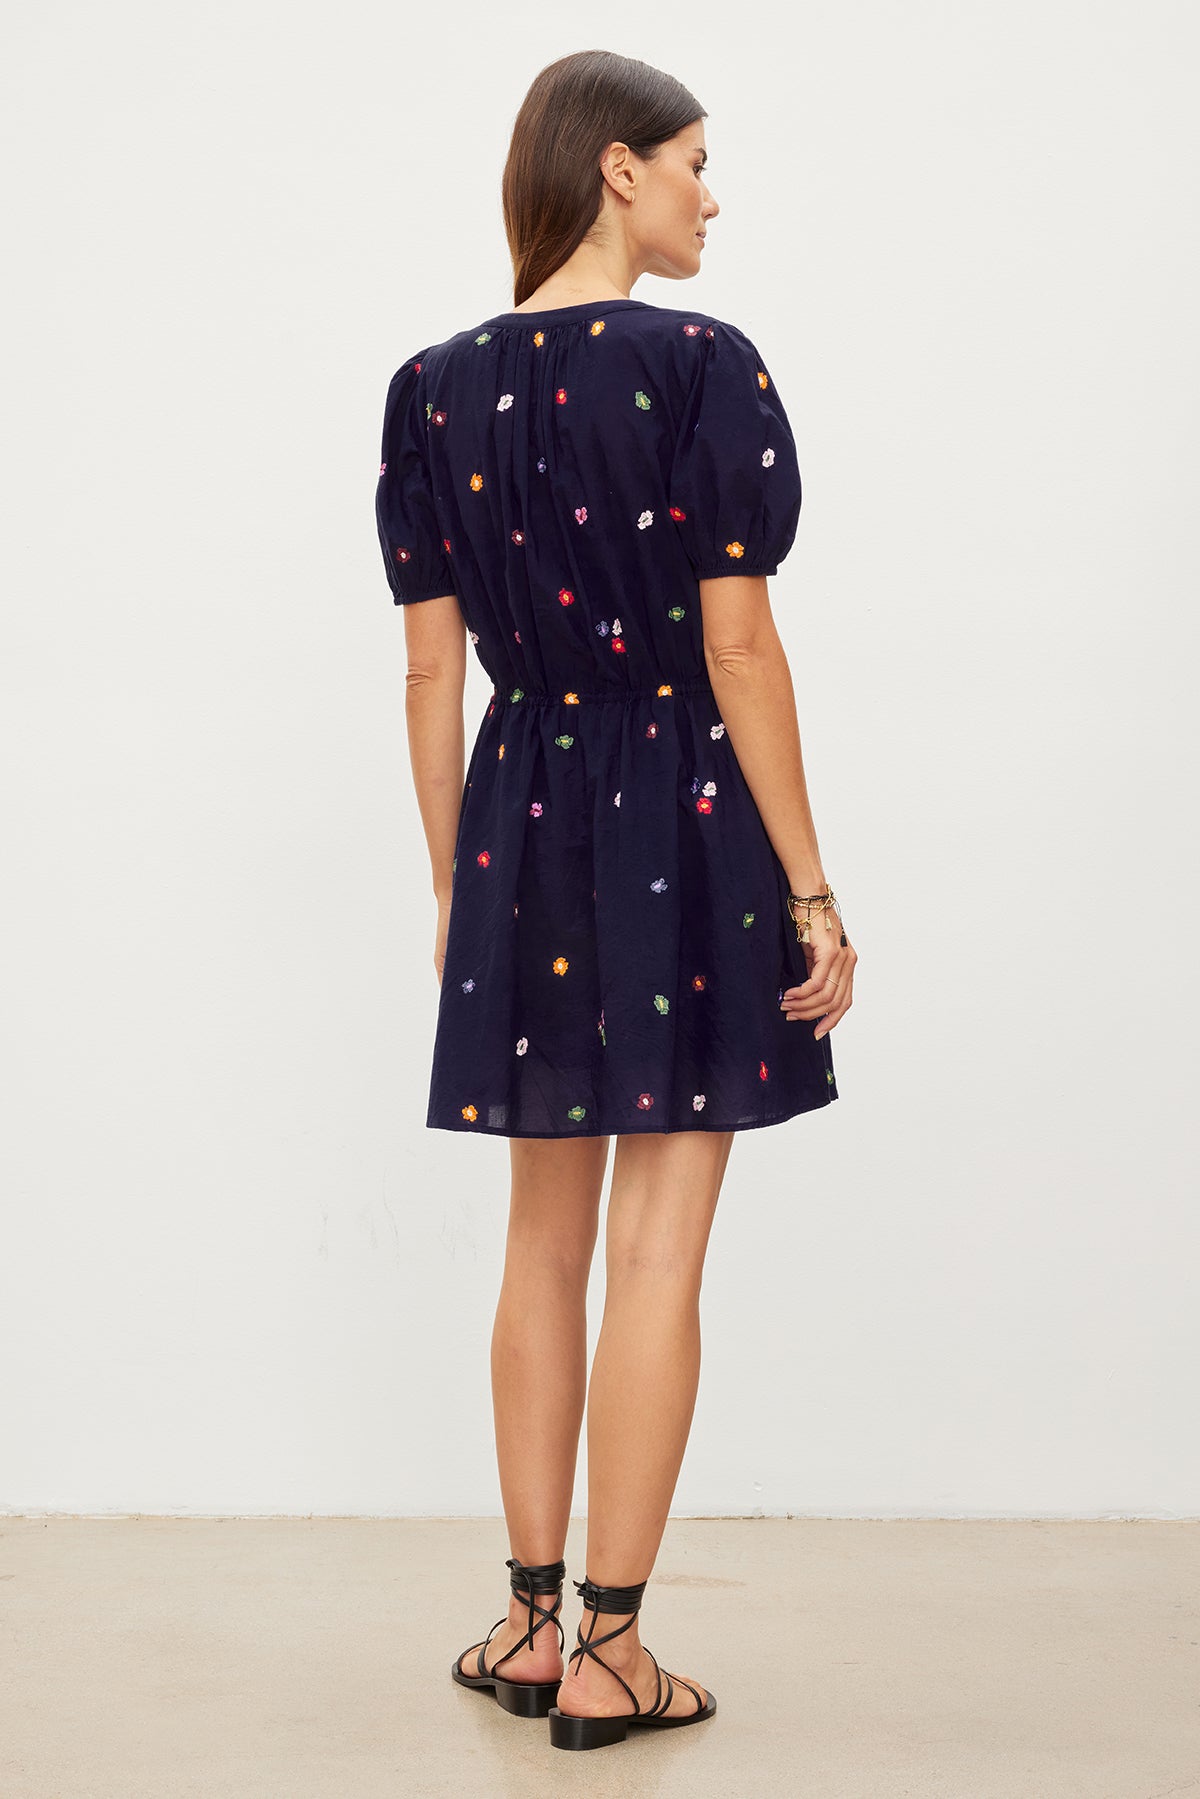 Woman from behind wearing a navy Velvet by Graham & Spencer dress with floral embroidery, tied at the drawstring waist, standing in a neutral setting.-35955576438977